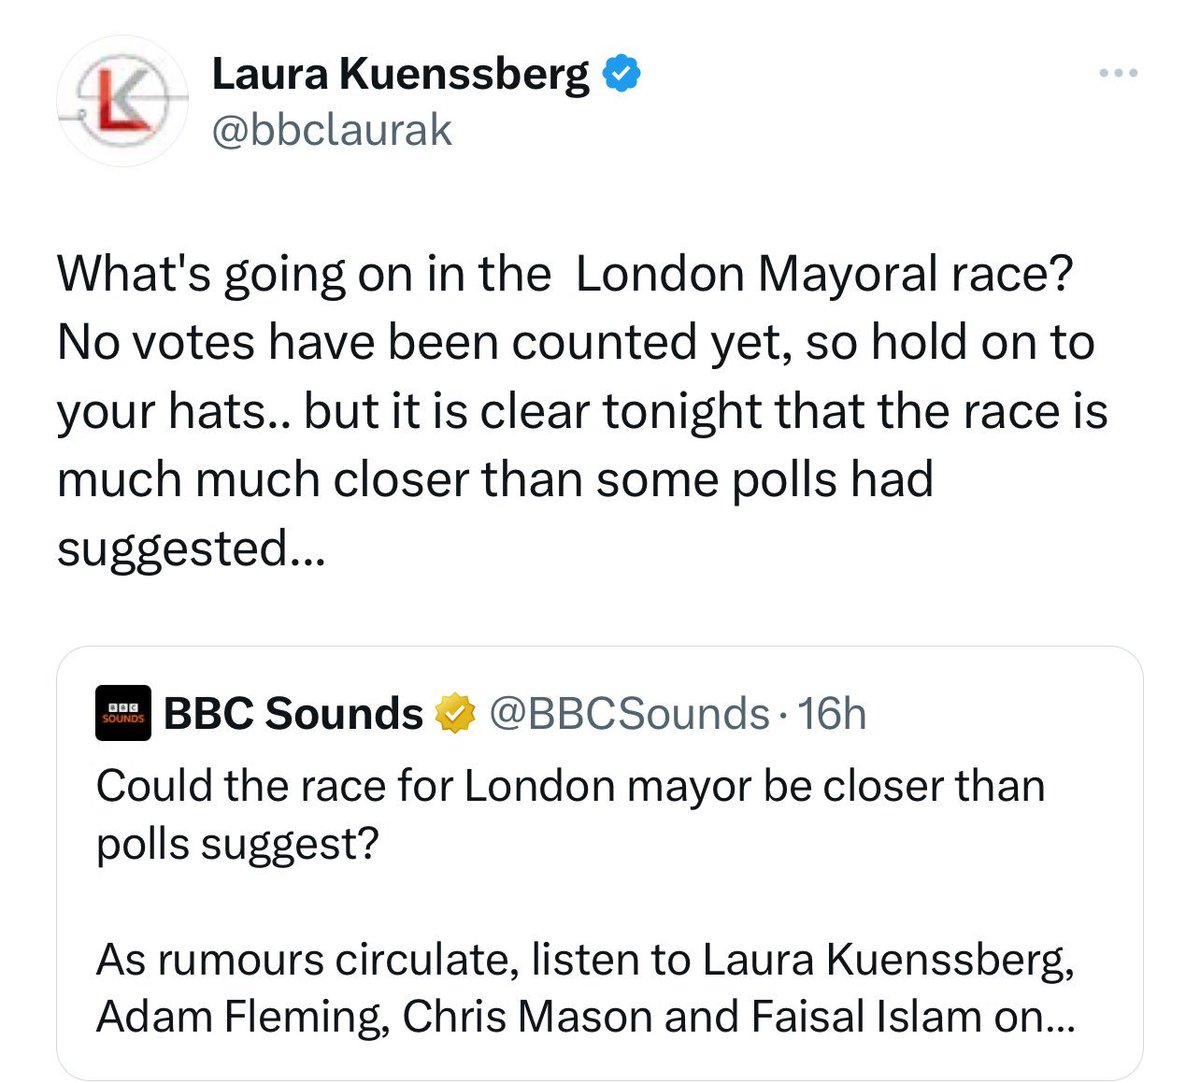 🚨 IT IS CLEAR that @UKLabour's Sadiq Khan has officially won a landmark third successive term as mayor of London. Khan, was first elected in May 2016, beat his Tory rival Susan Hall BY MORE THAN 276,000 VOTES - representing a swing of 3.2% to Labour. Will #bbclaurak resign? 🧐